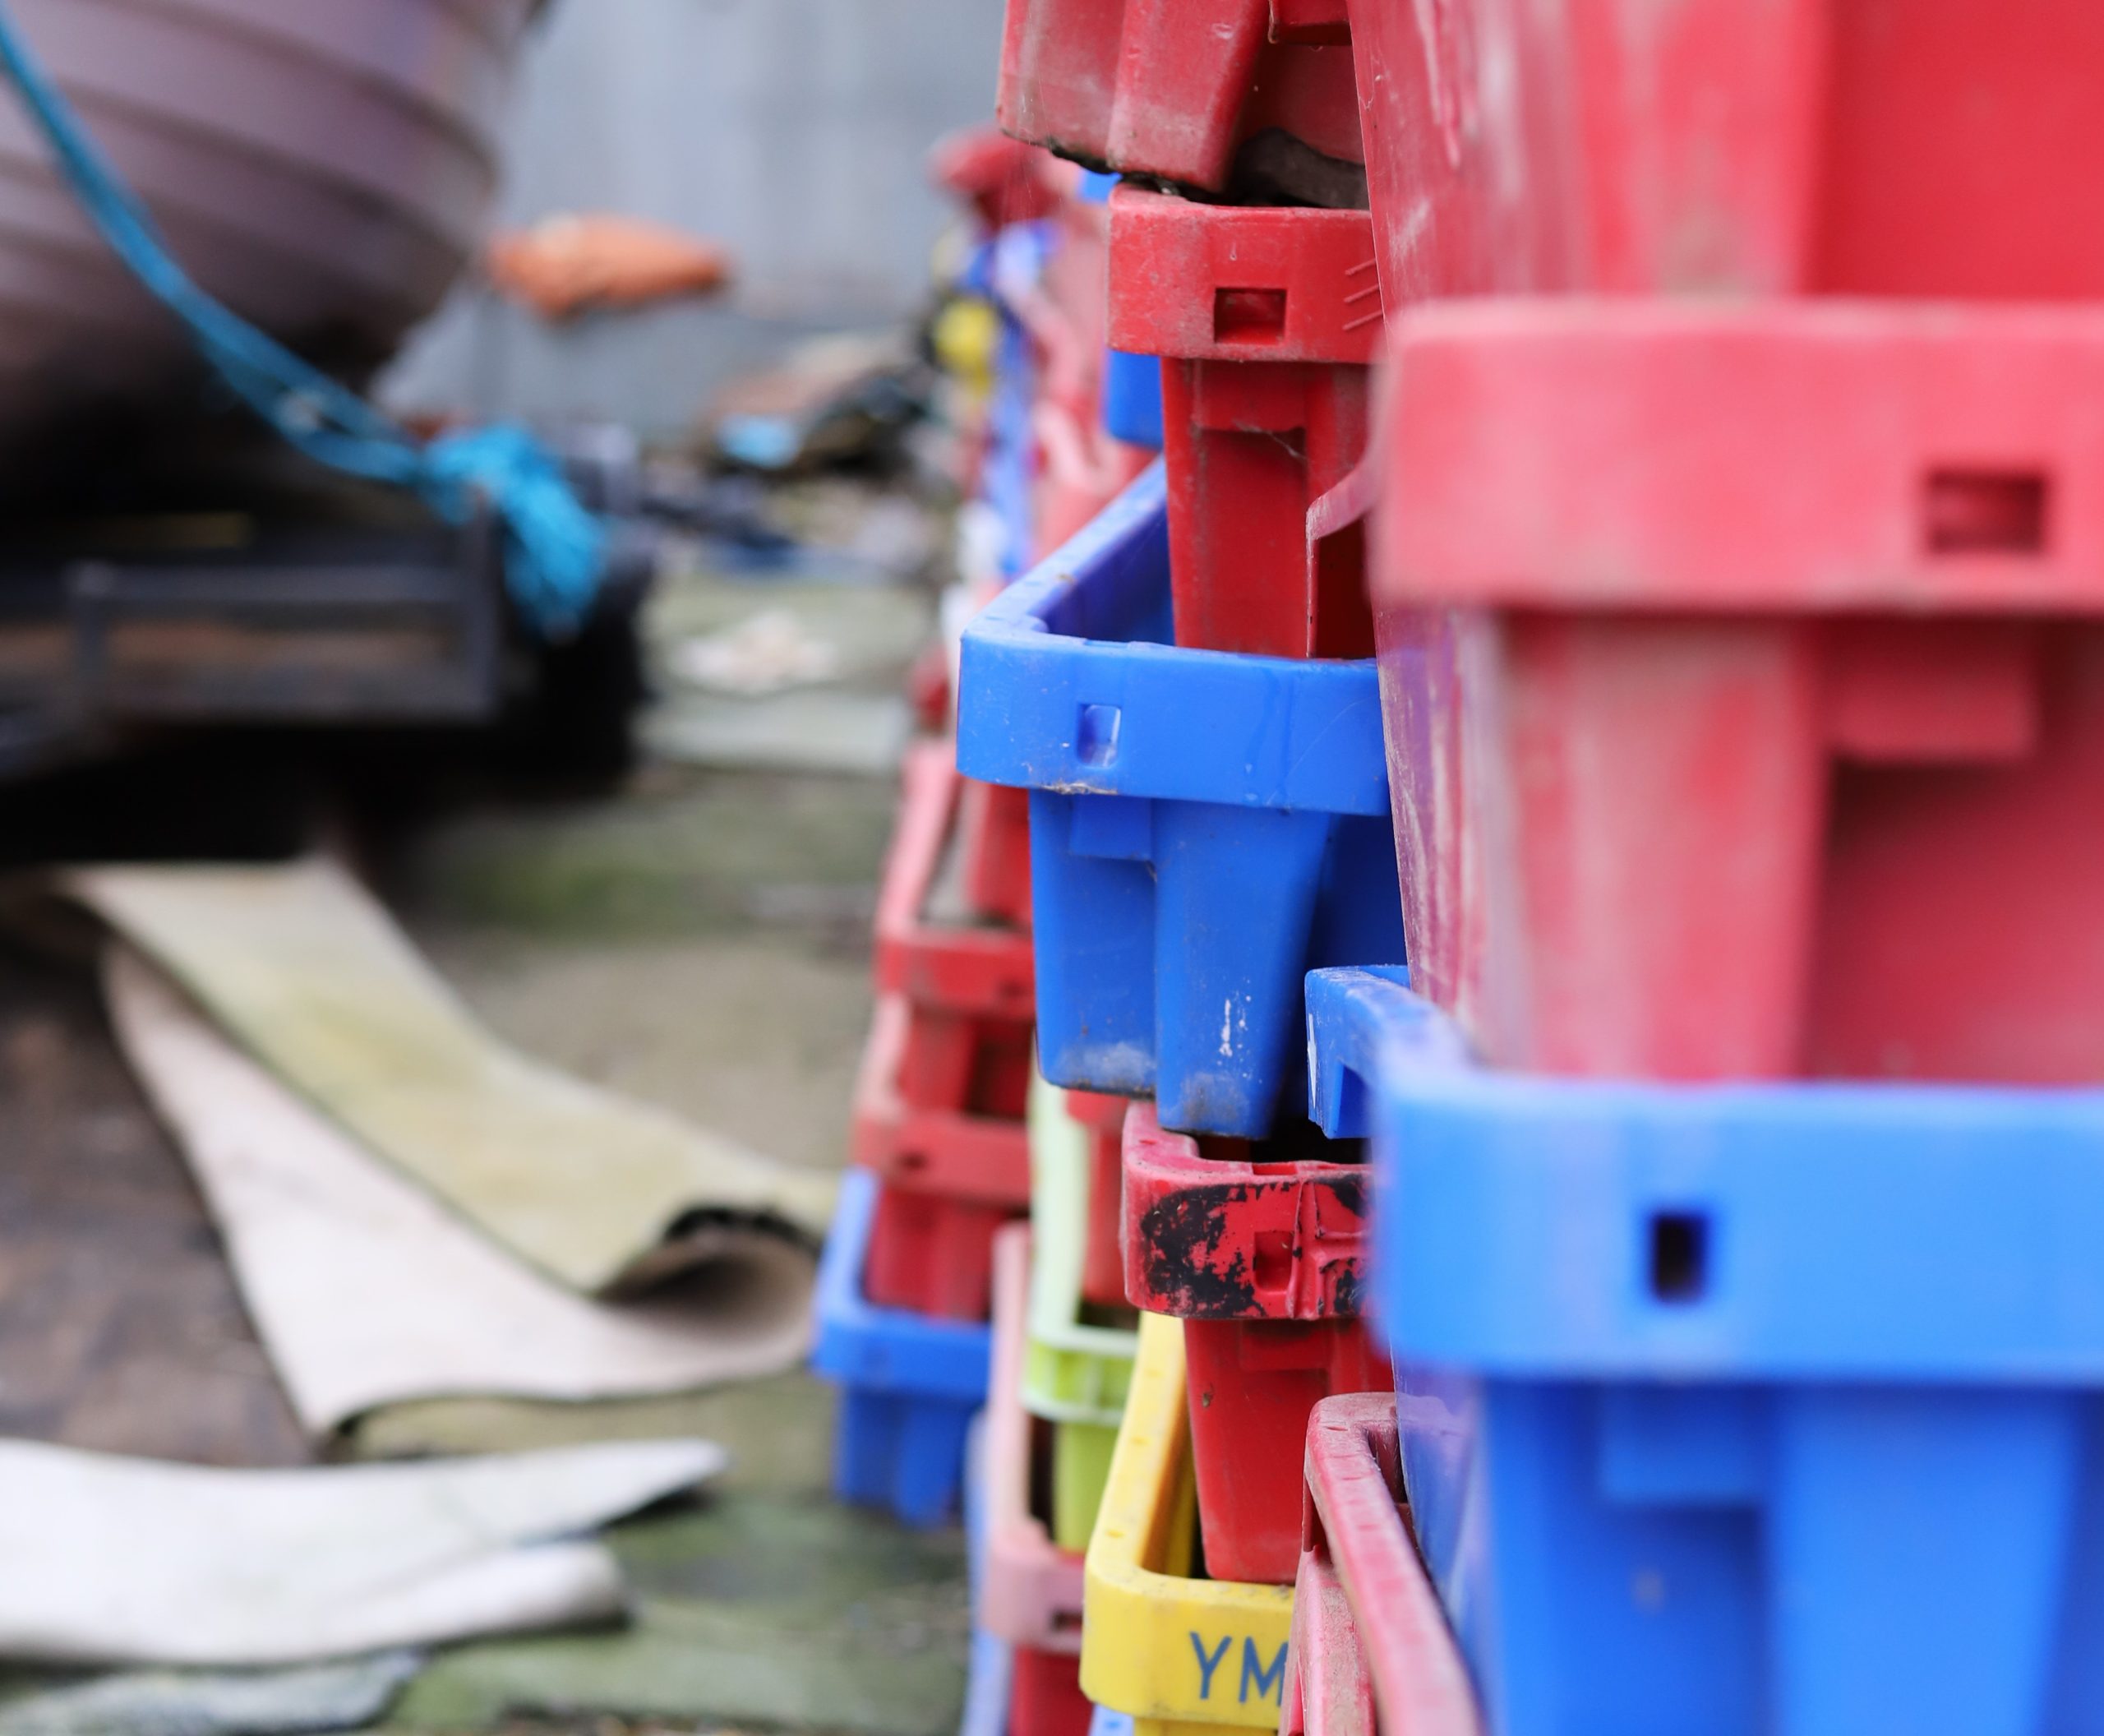 Rock-a-Nore, plastic crates in red and blue